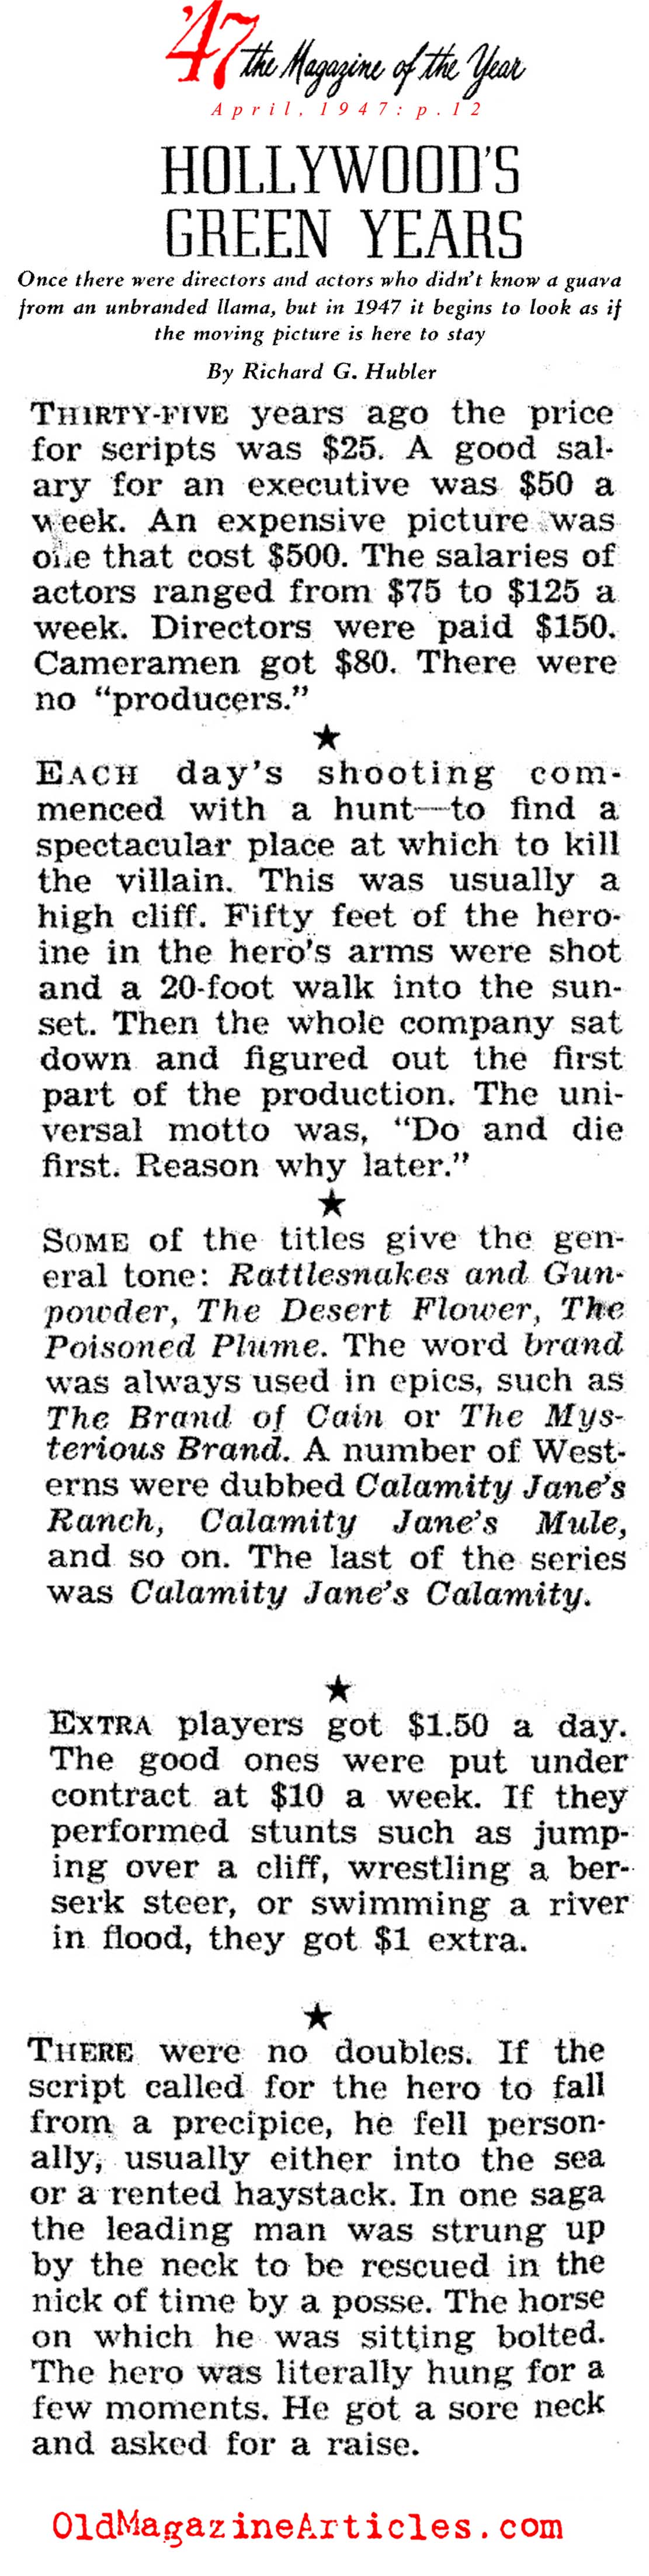 Fast Facts About Hollywood Silent Movies ('47 Magazine, 1947)